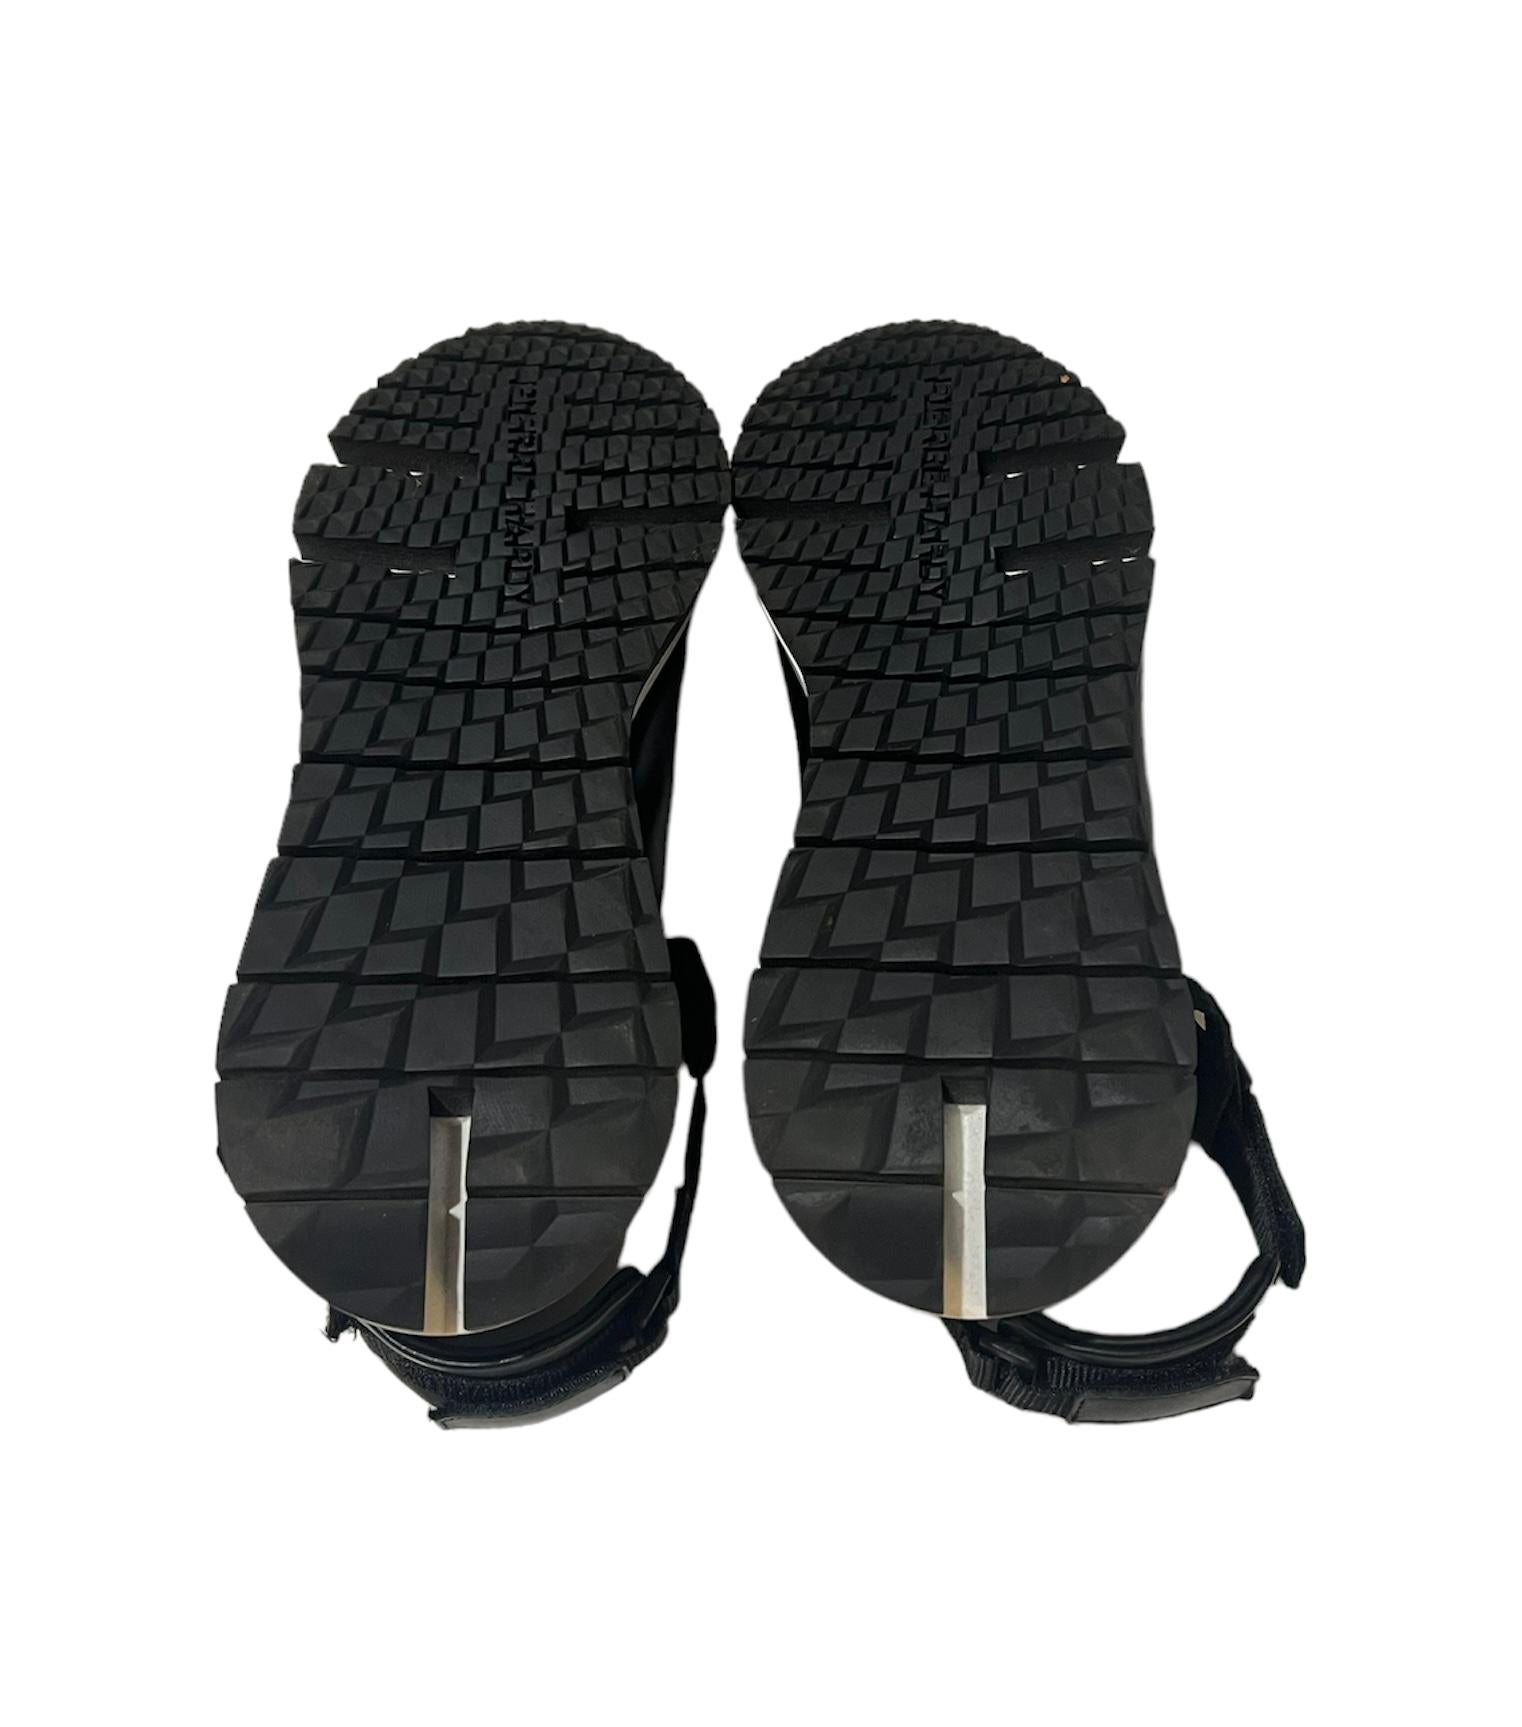 Pierre Hardy Black and White Sandals Shoes, Size 39 For Sale 3